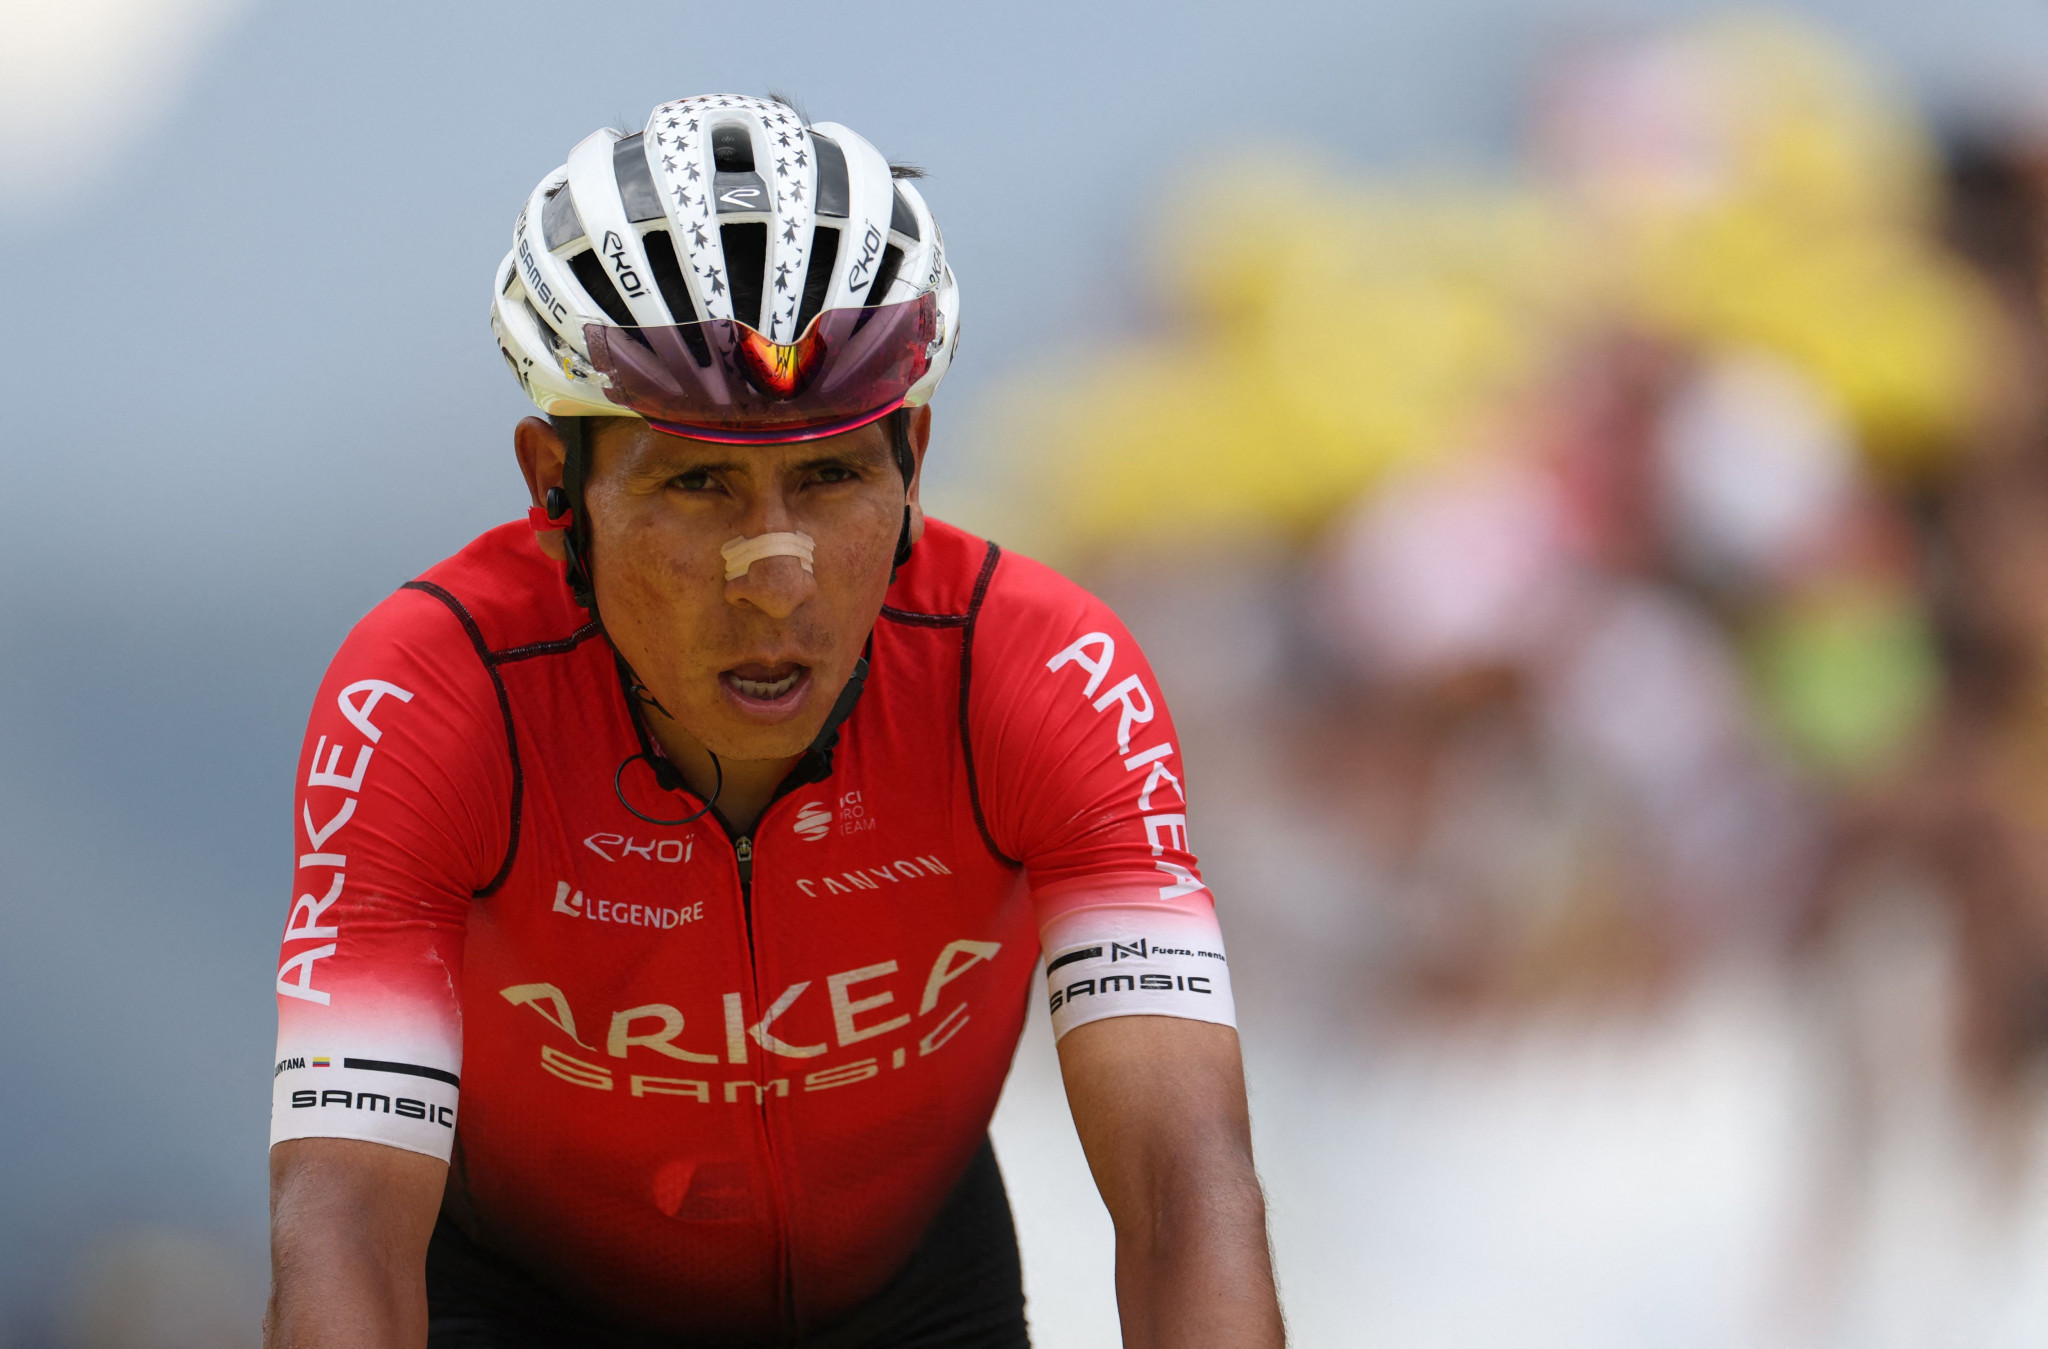 Quintana leaves Arkéa-Samsic after tramadol punishment from UCI